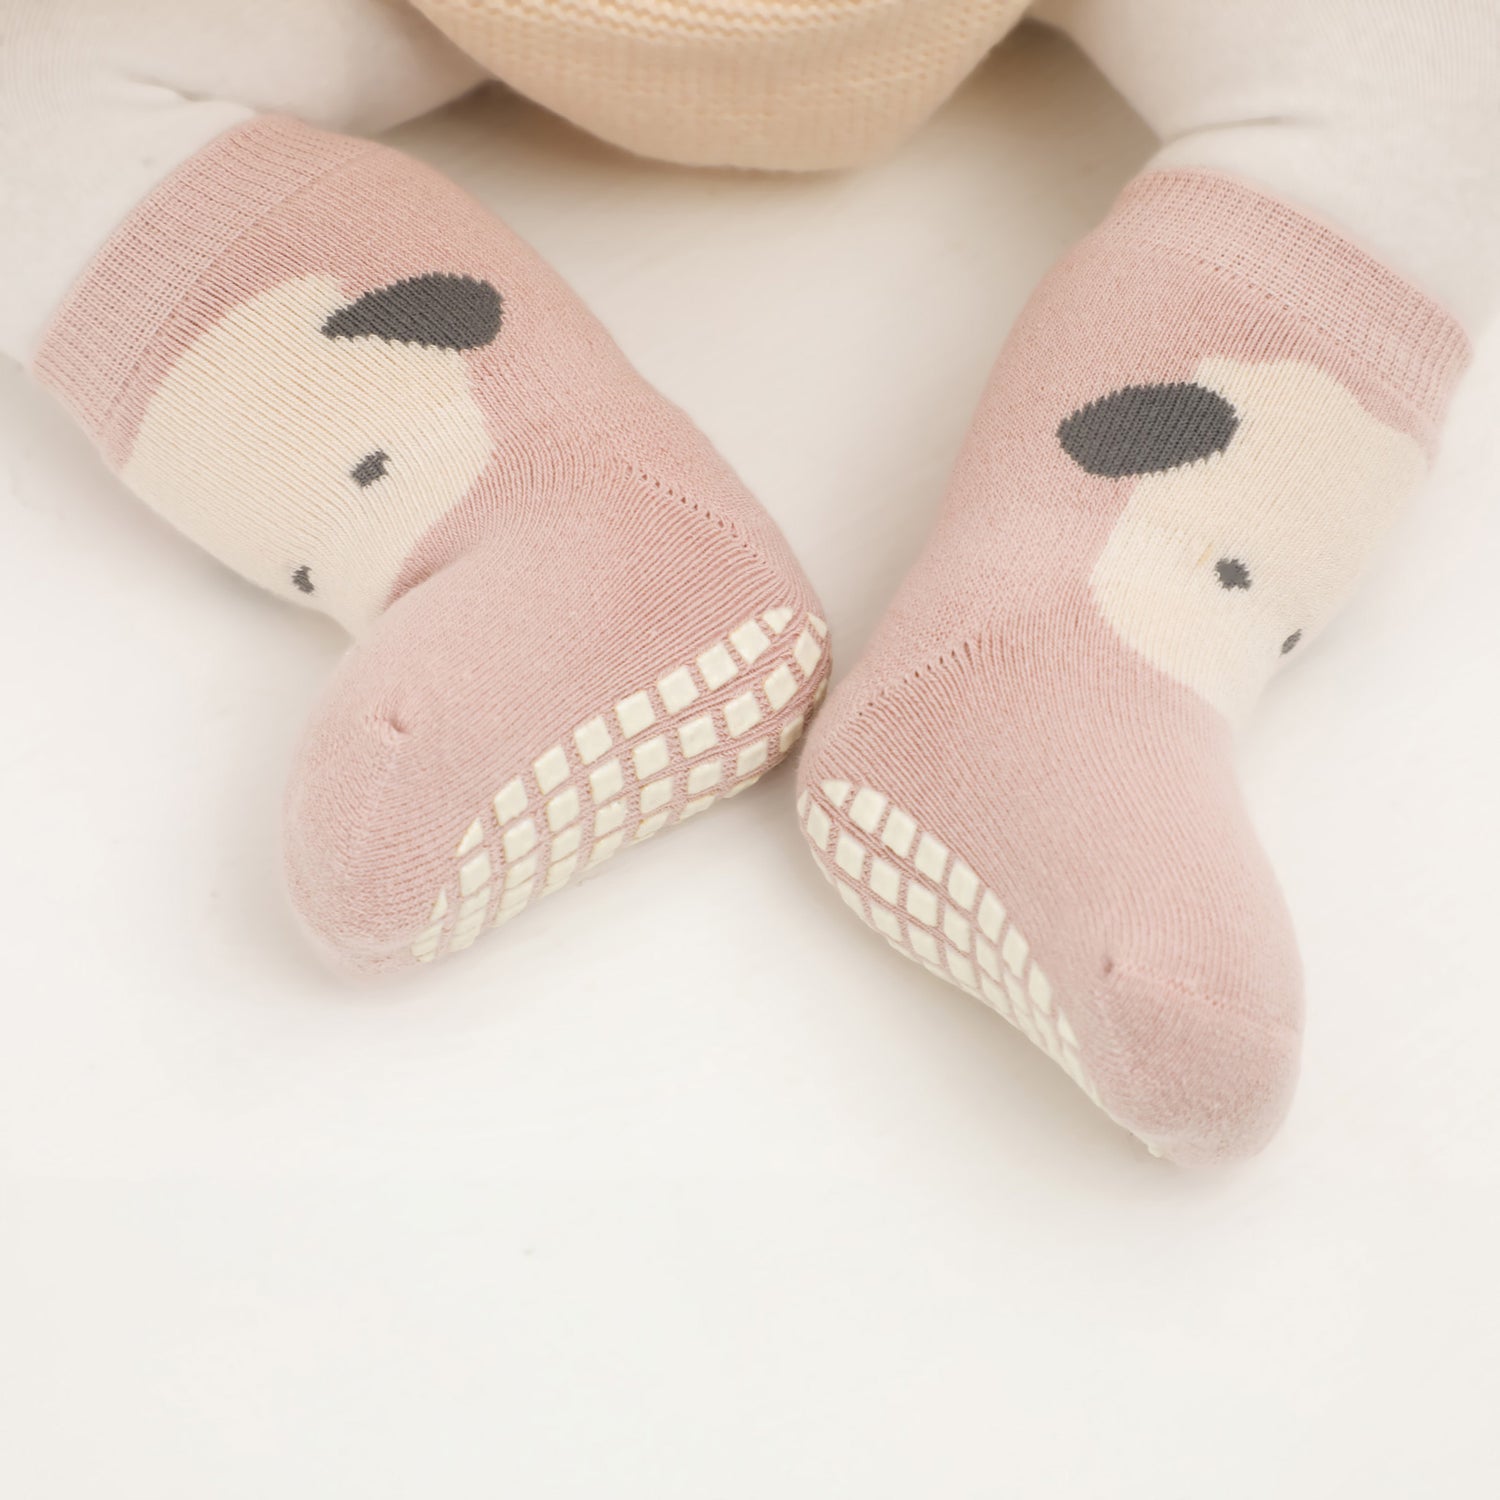 Comfortable ankle socks equipped with grips for a secure and snug fit for little ones.